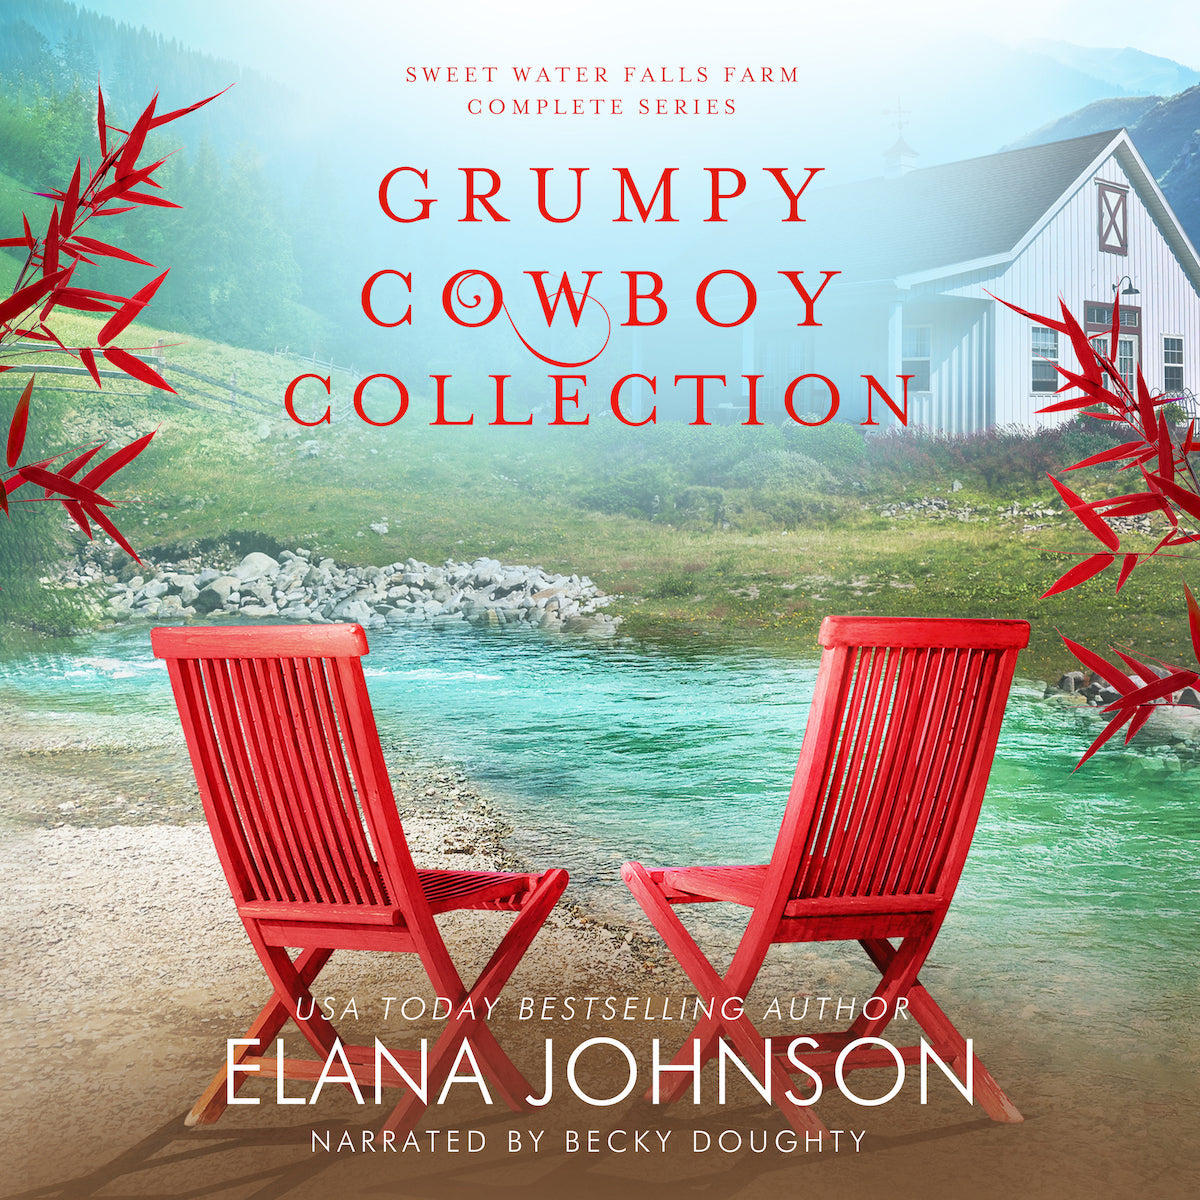 Small Town Ultimate Cowboy Audiobook Bundle